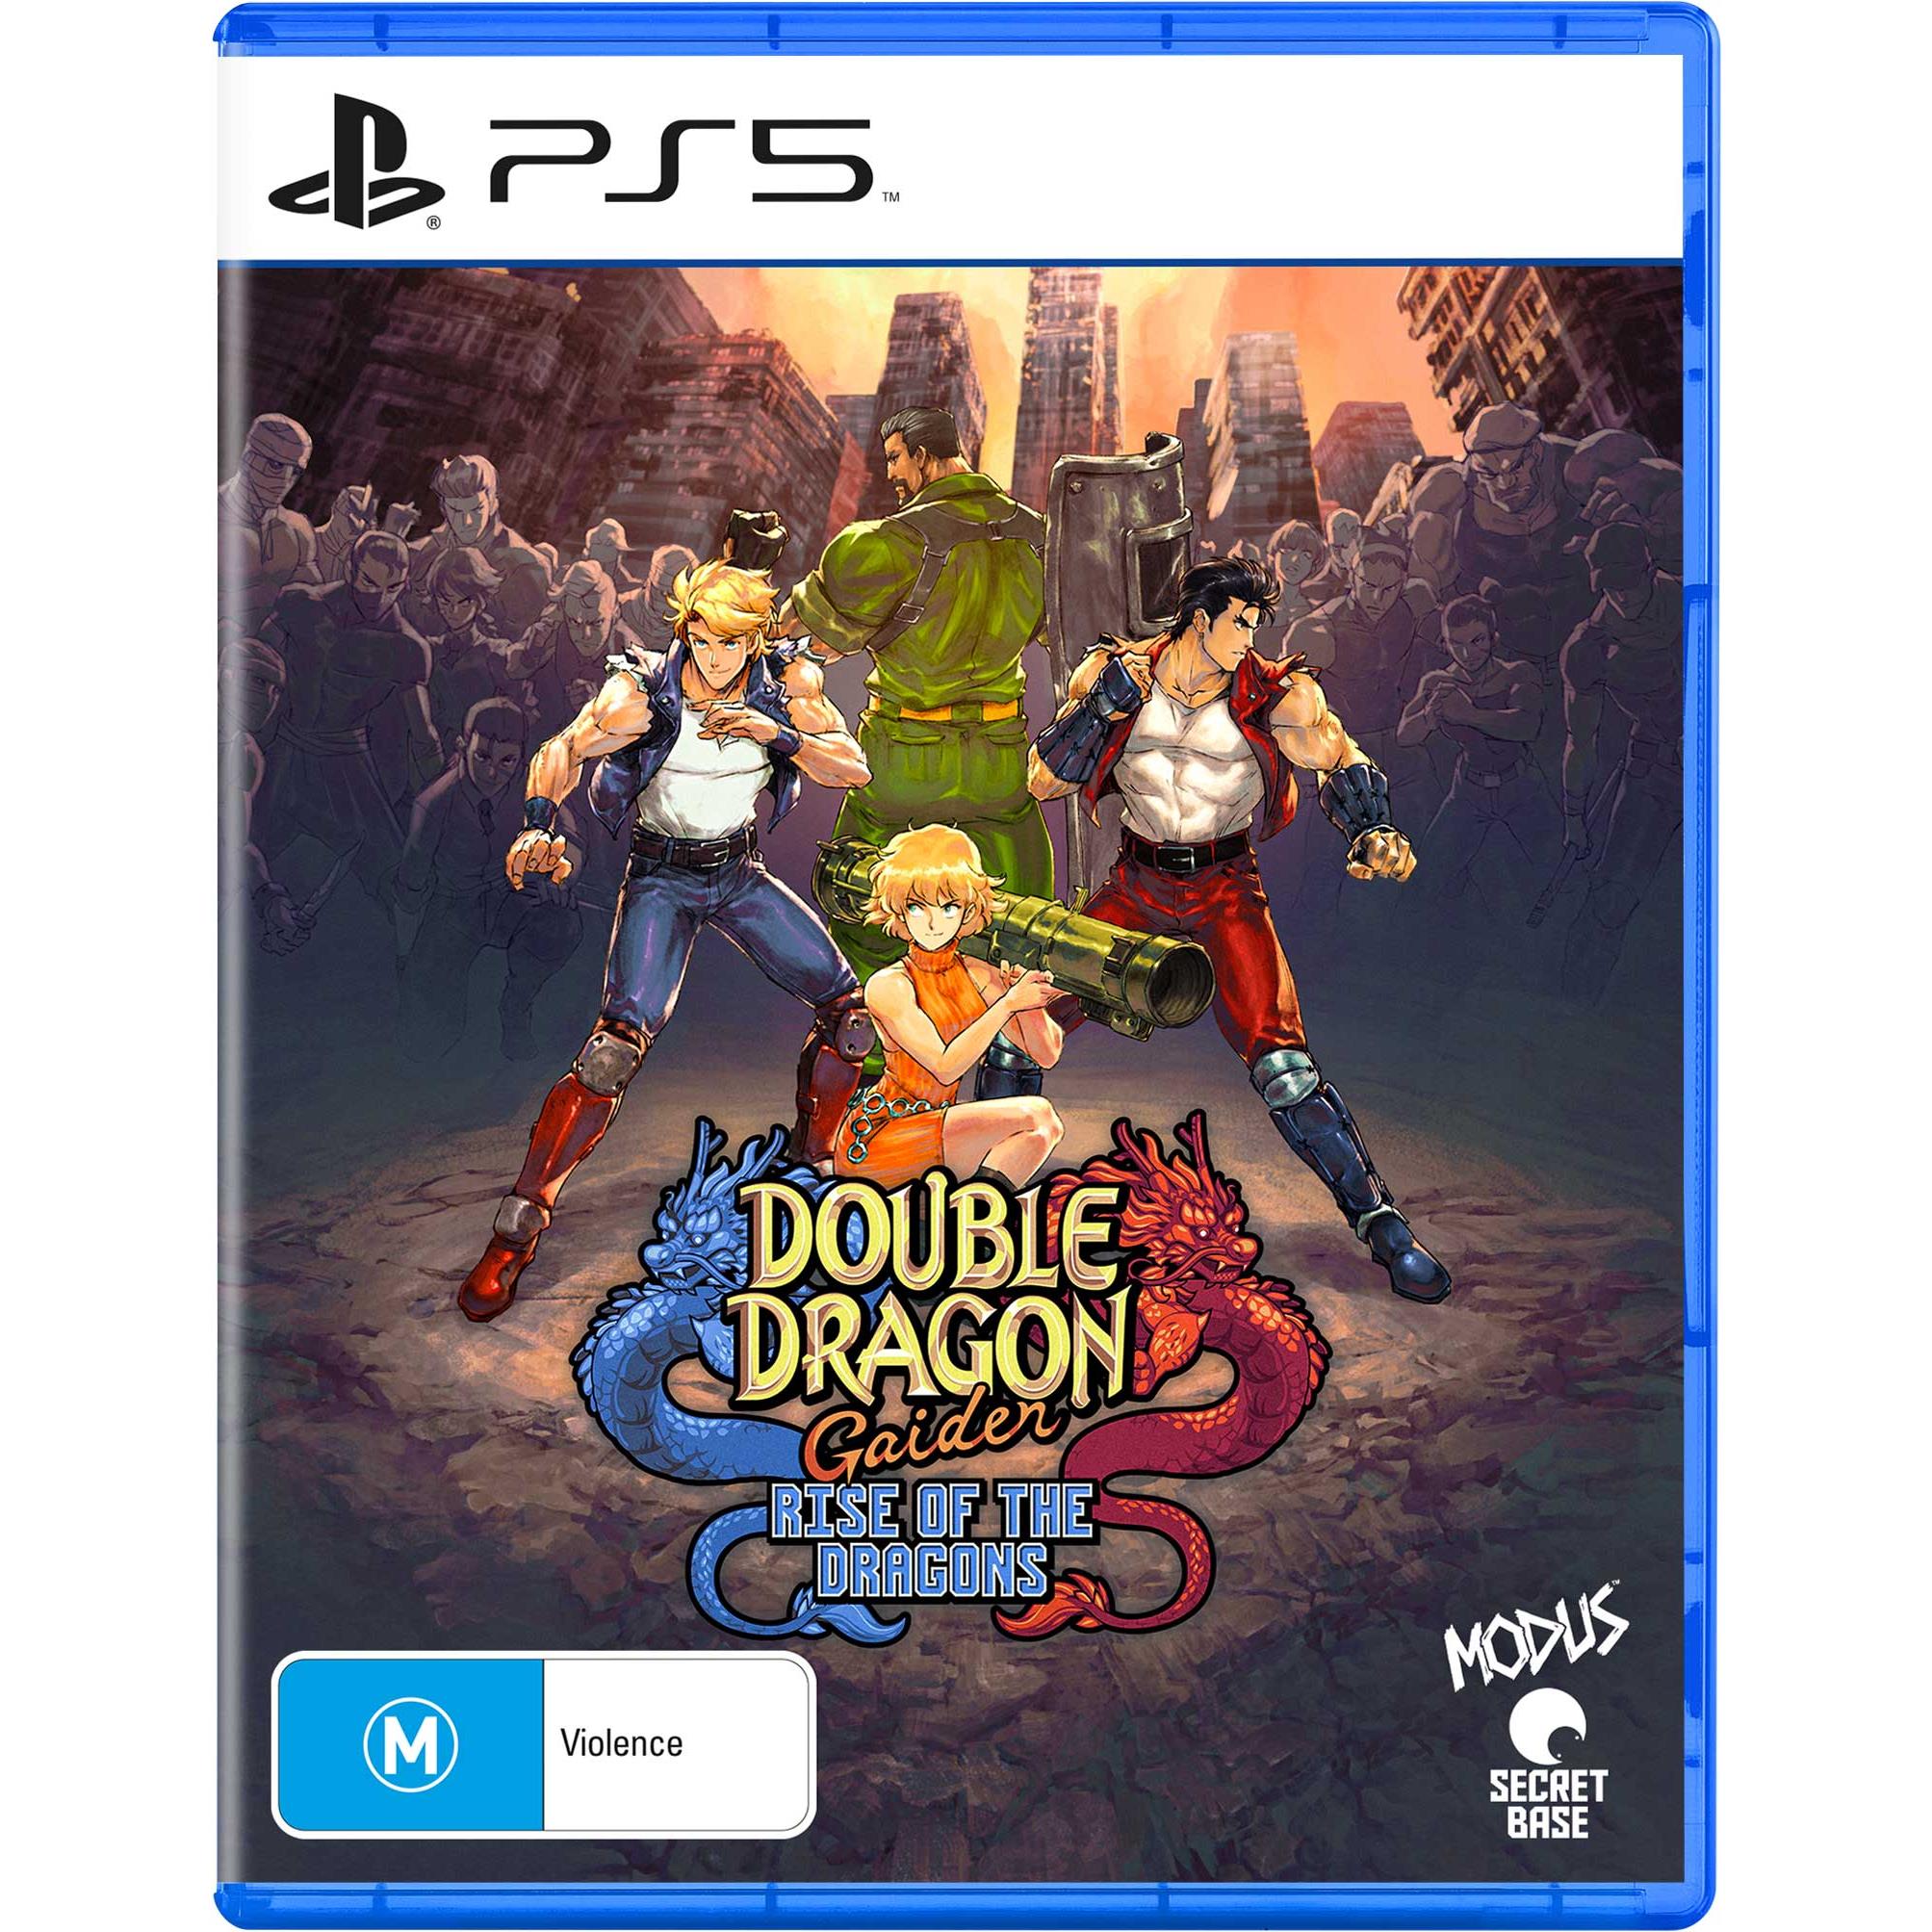 double dragon gaiden: rise of the dragons